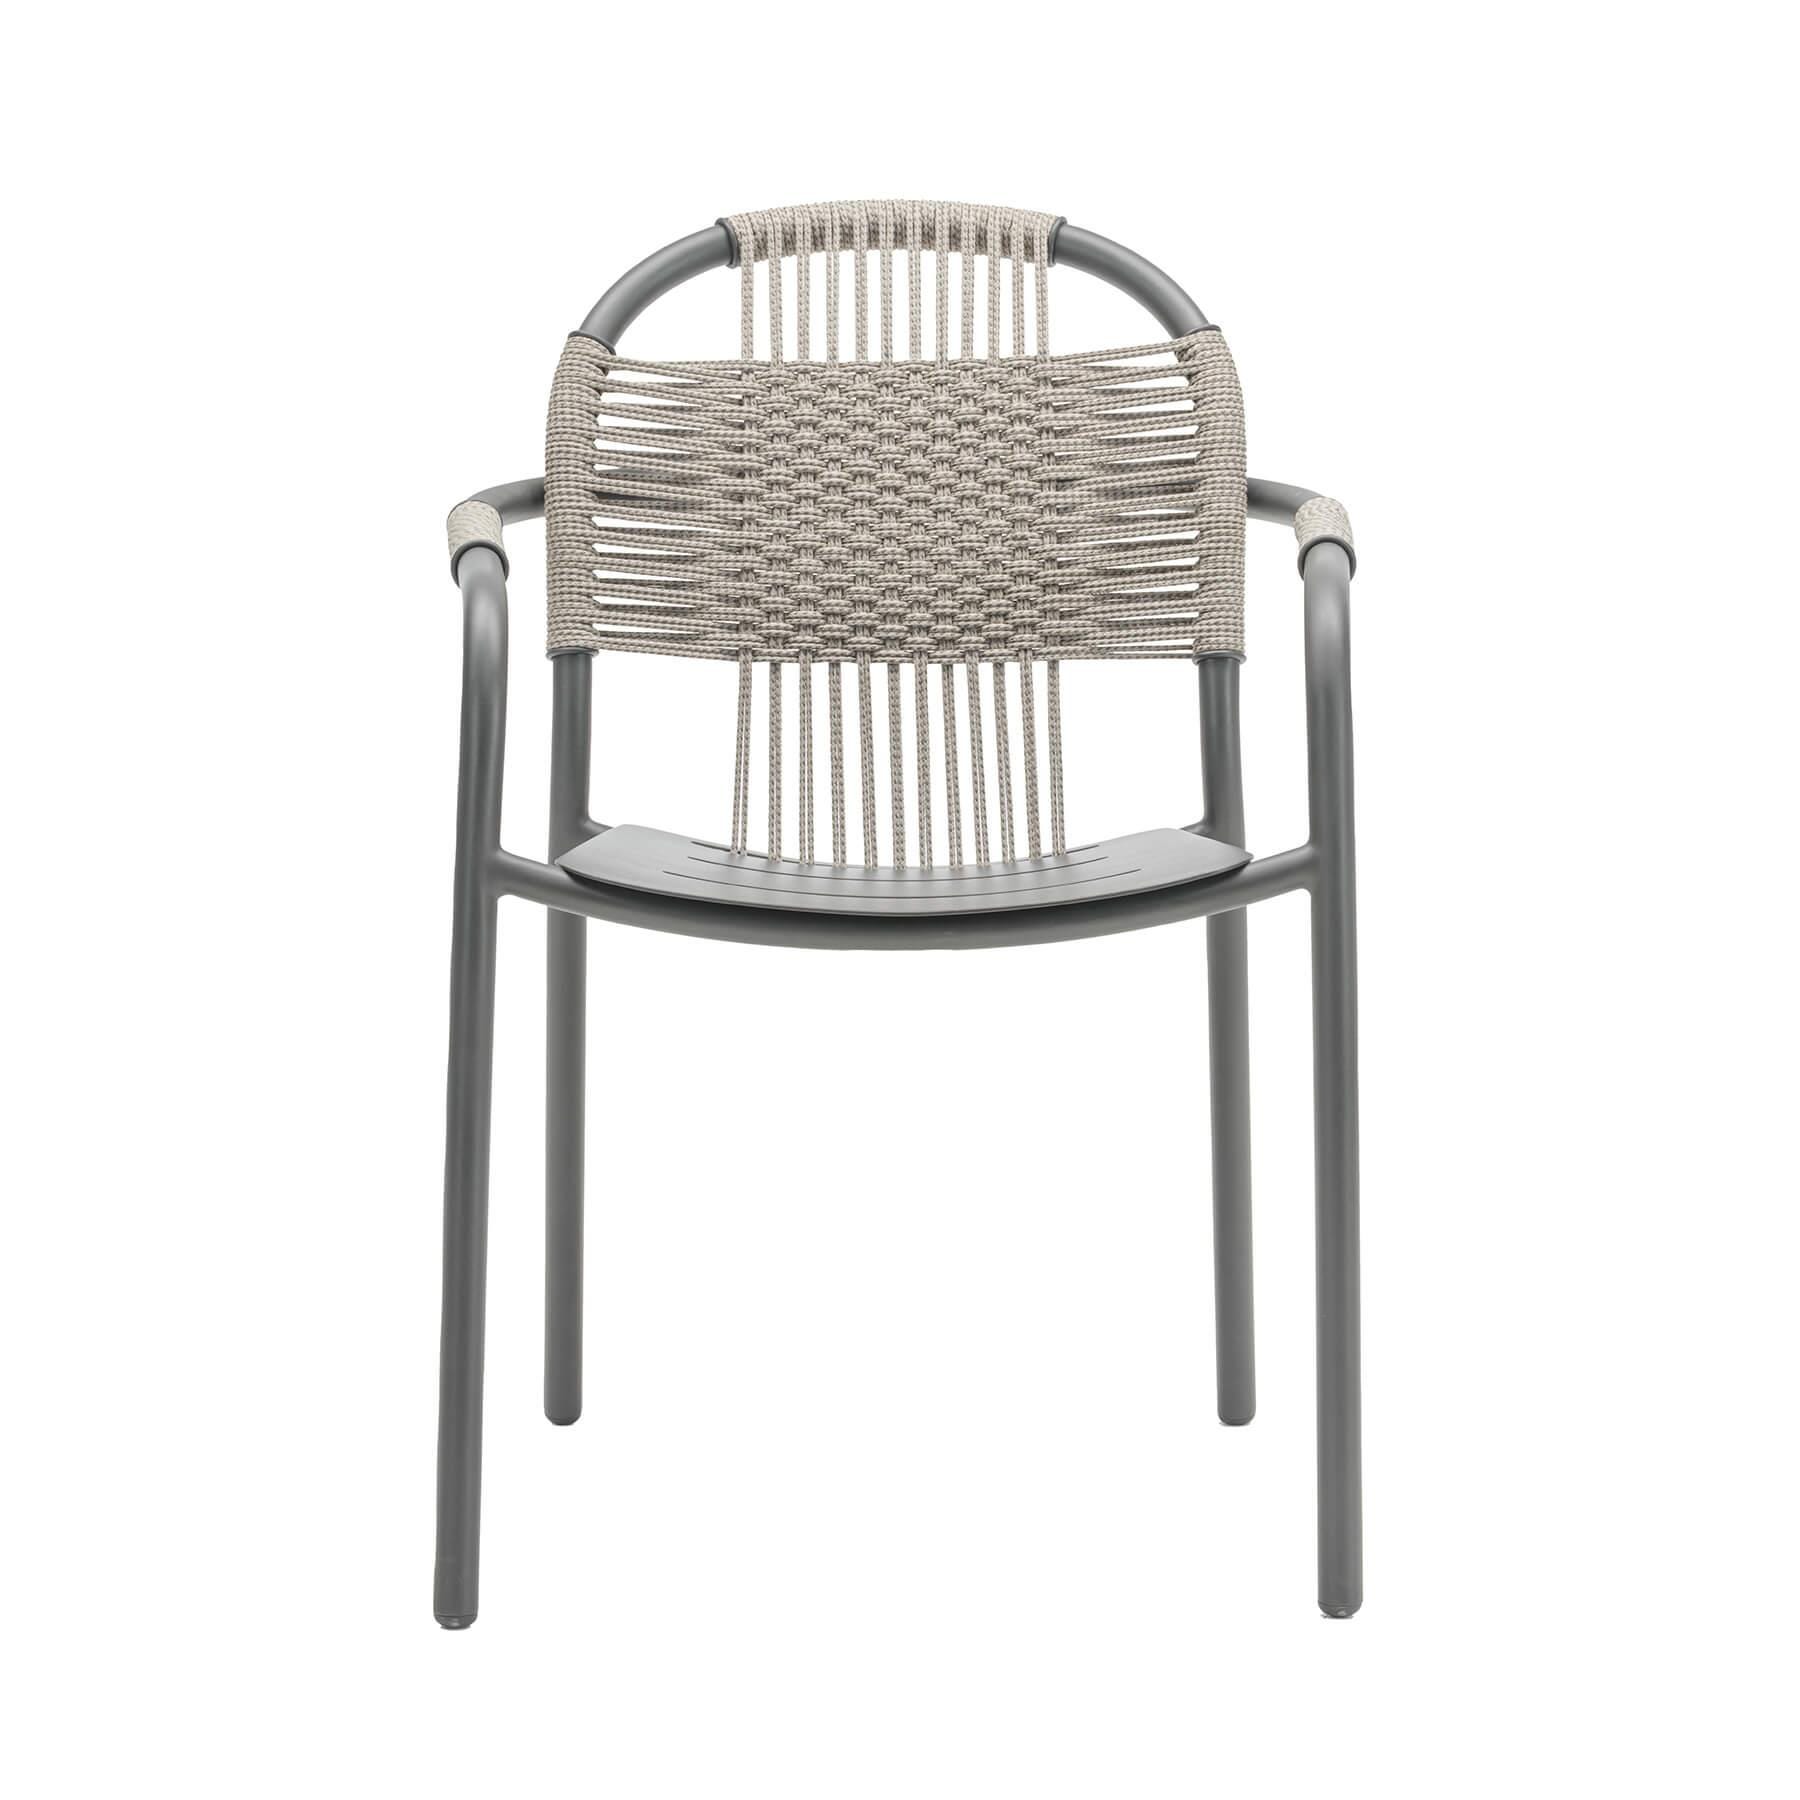 Vincent Sheppard Cleo Garden Dining Armchair Fossil Grey Designer Furniture From Holloways Of Ludlow